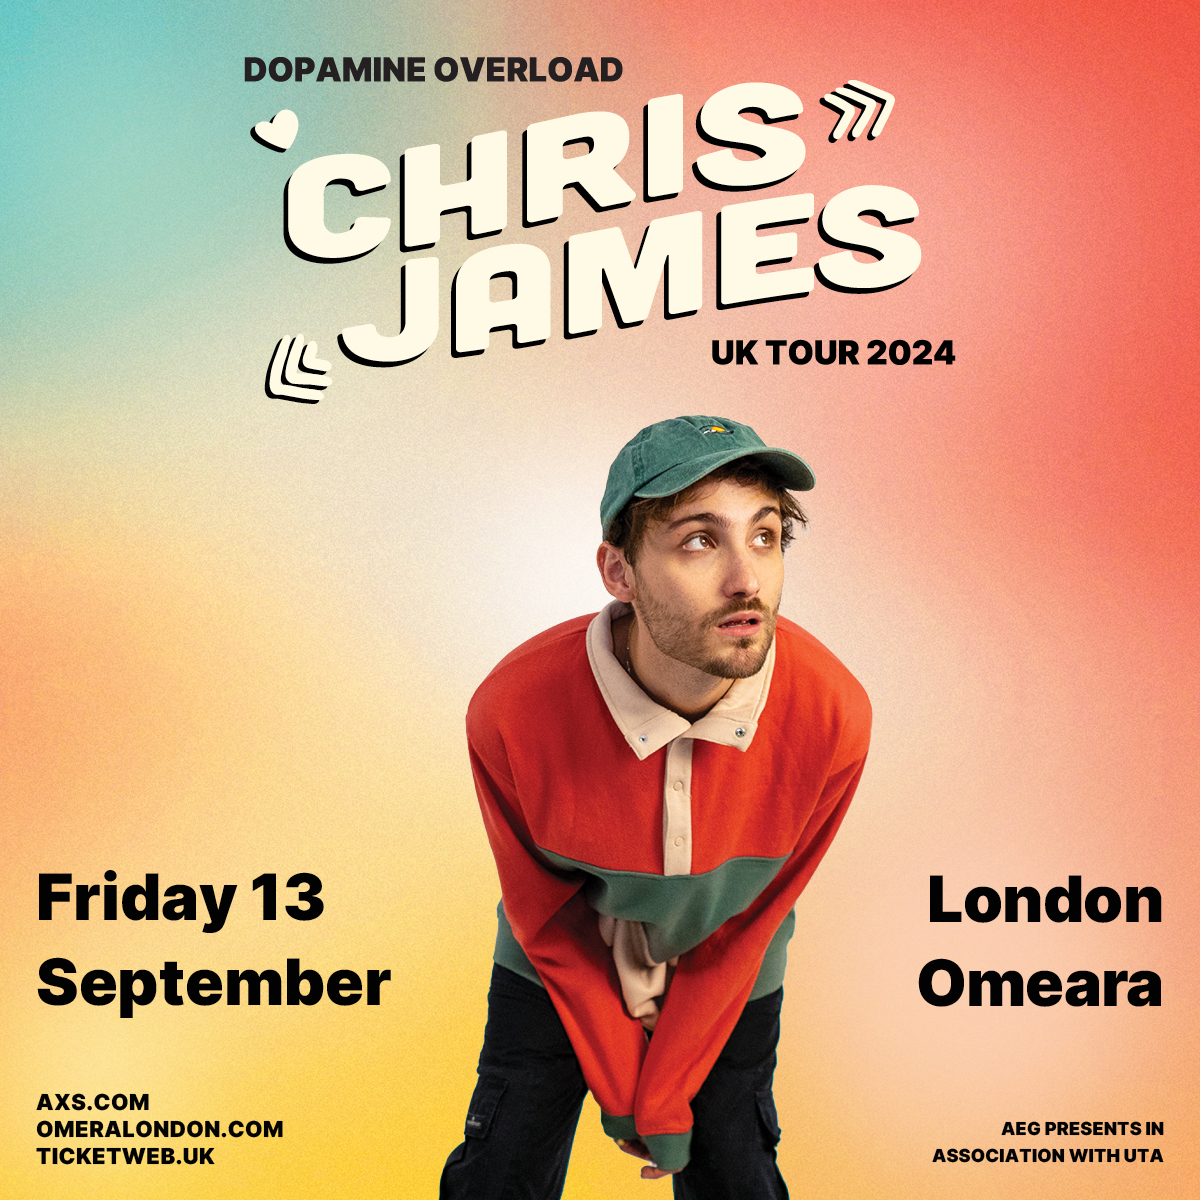 JUST ANNOUNCED! @ohhichrisjames | @OmearaLondon | 13 Sep 2024 Tickets on sale Tuesday at 10am: aegp.uk/ChrisJames24